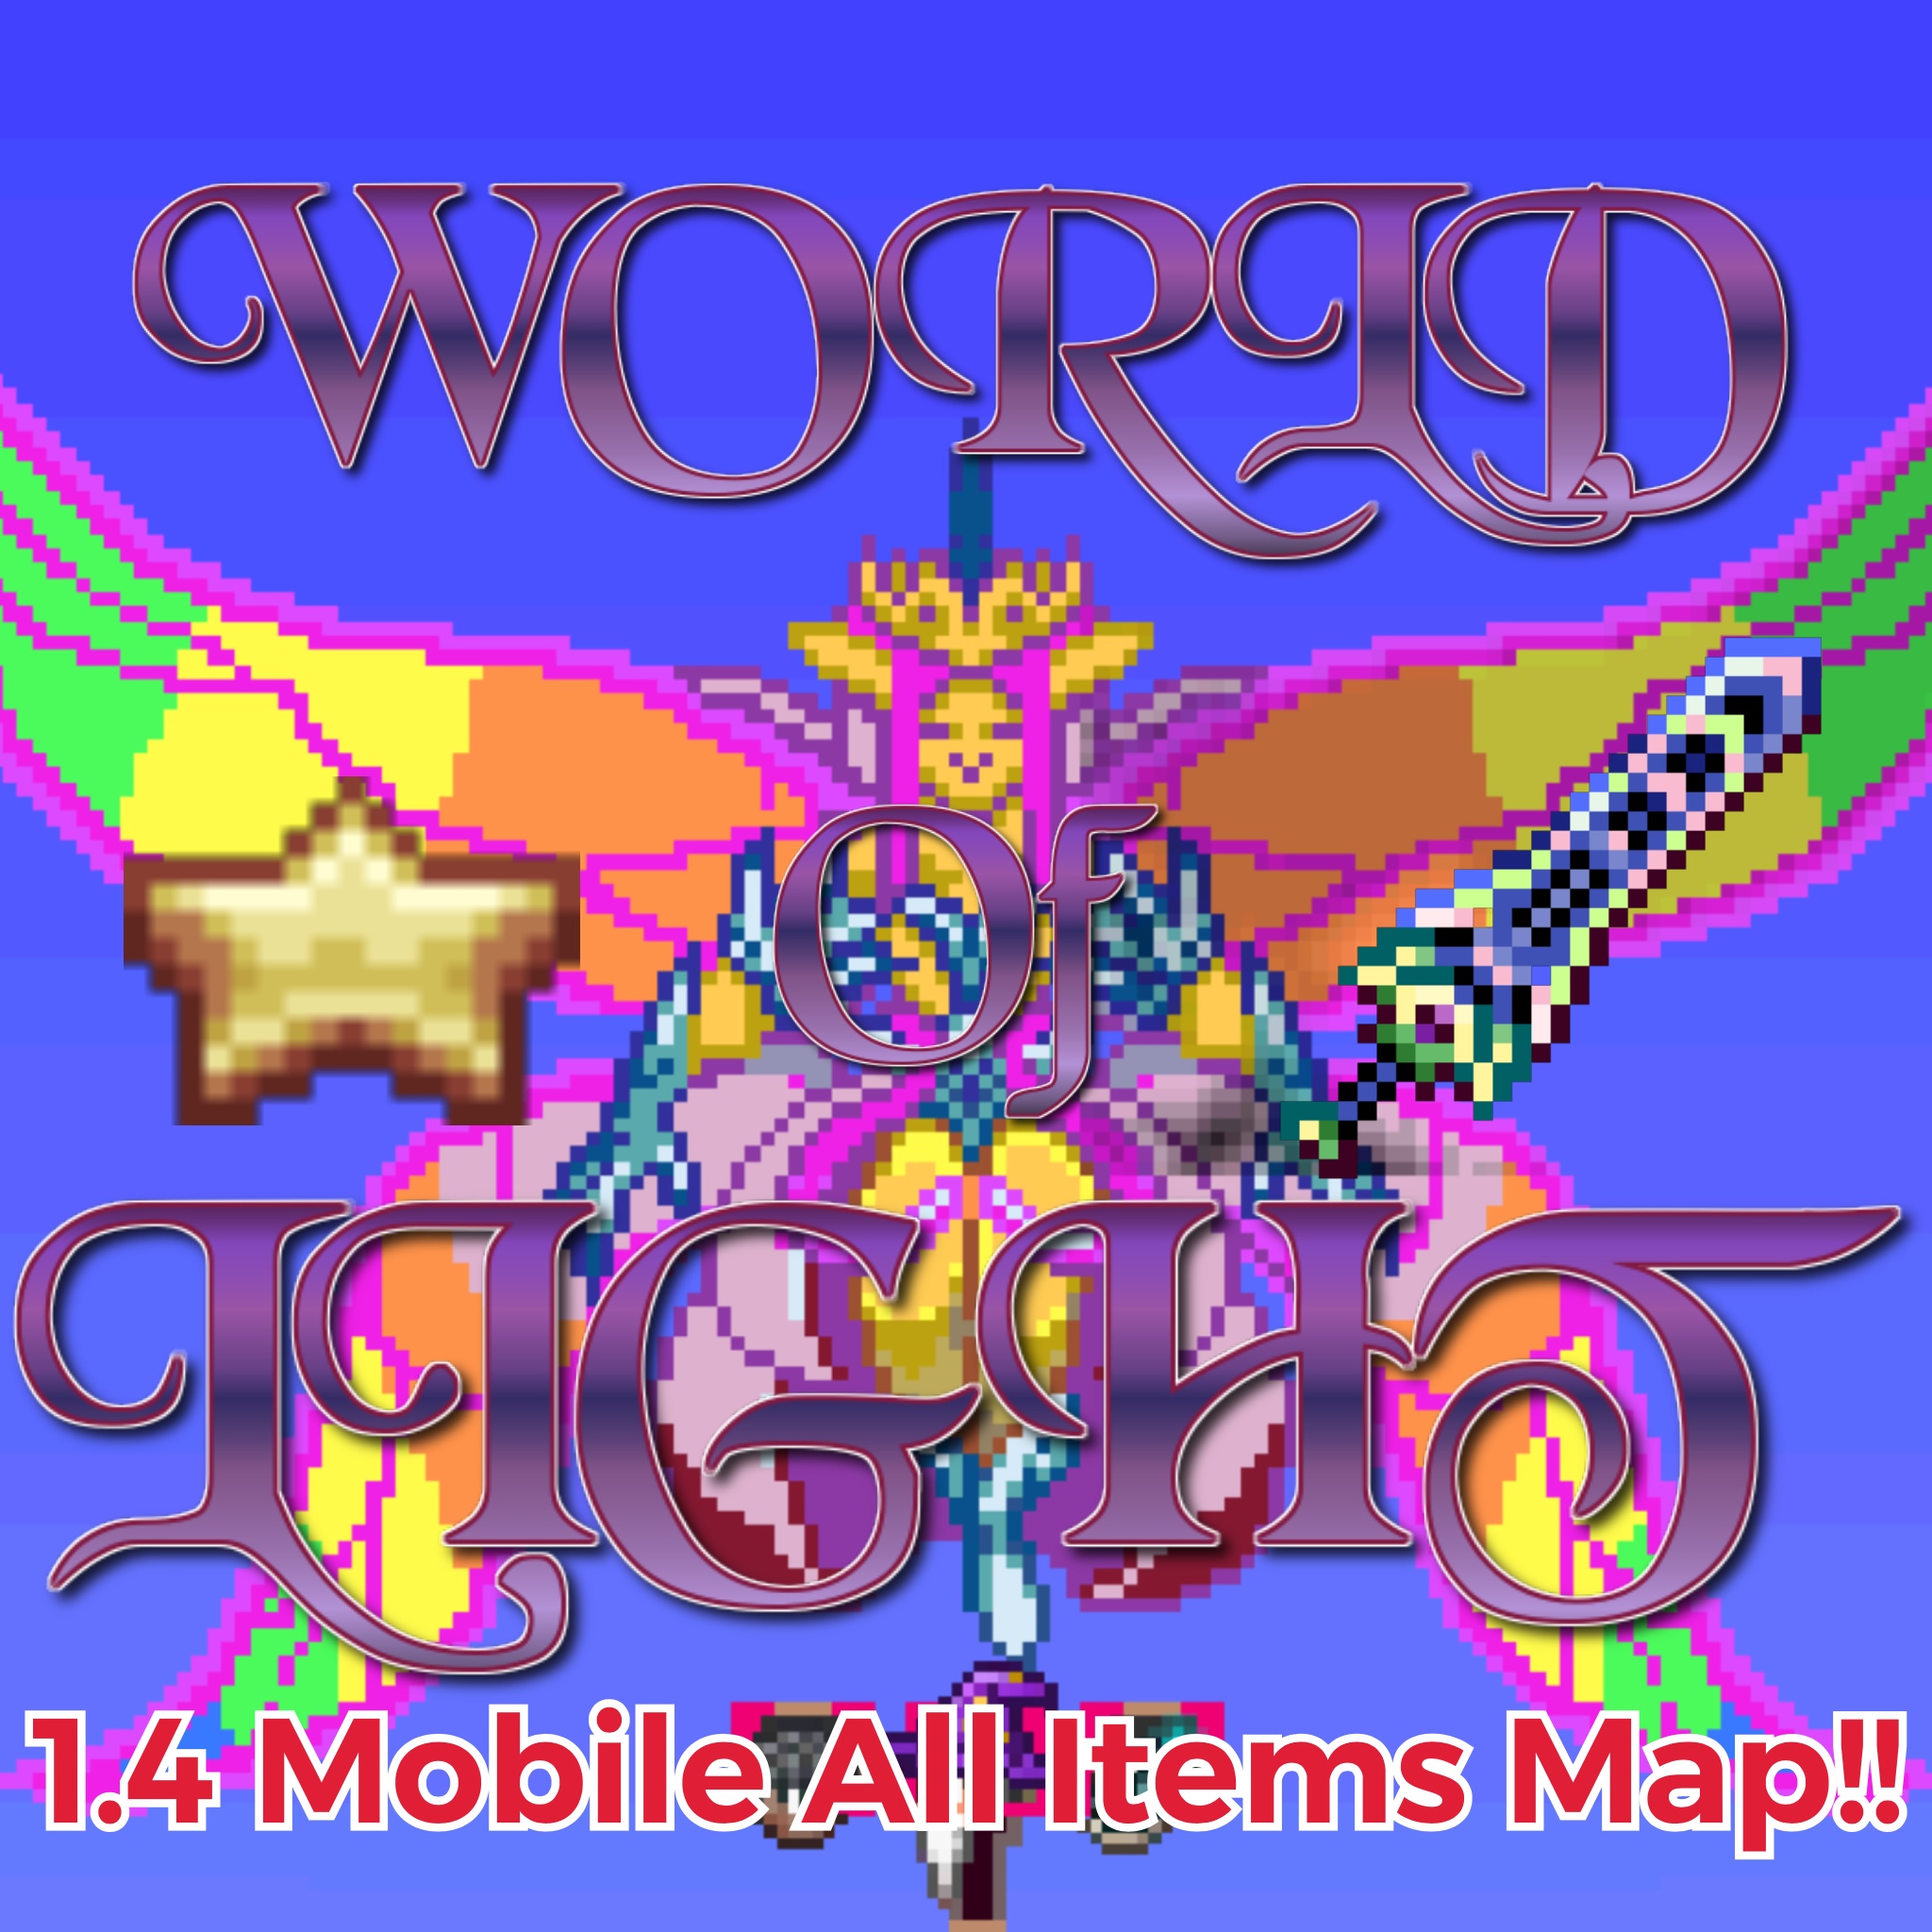 New Update Mobile All Item Map! -World of Light- project avatar